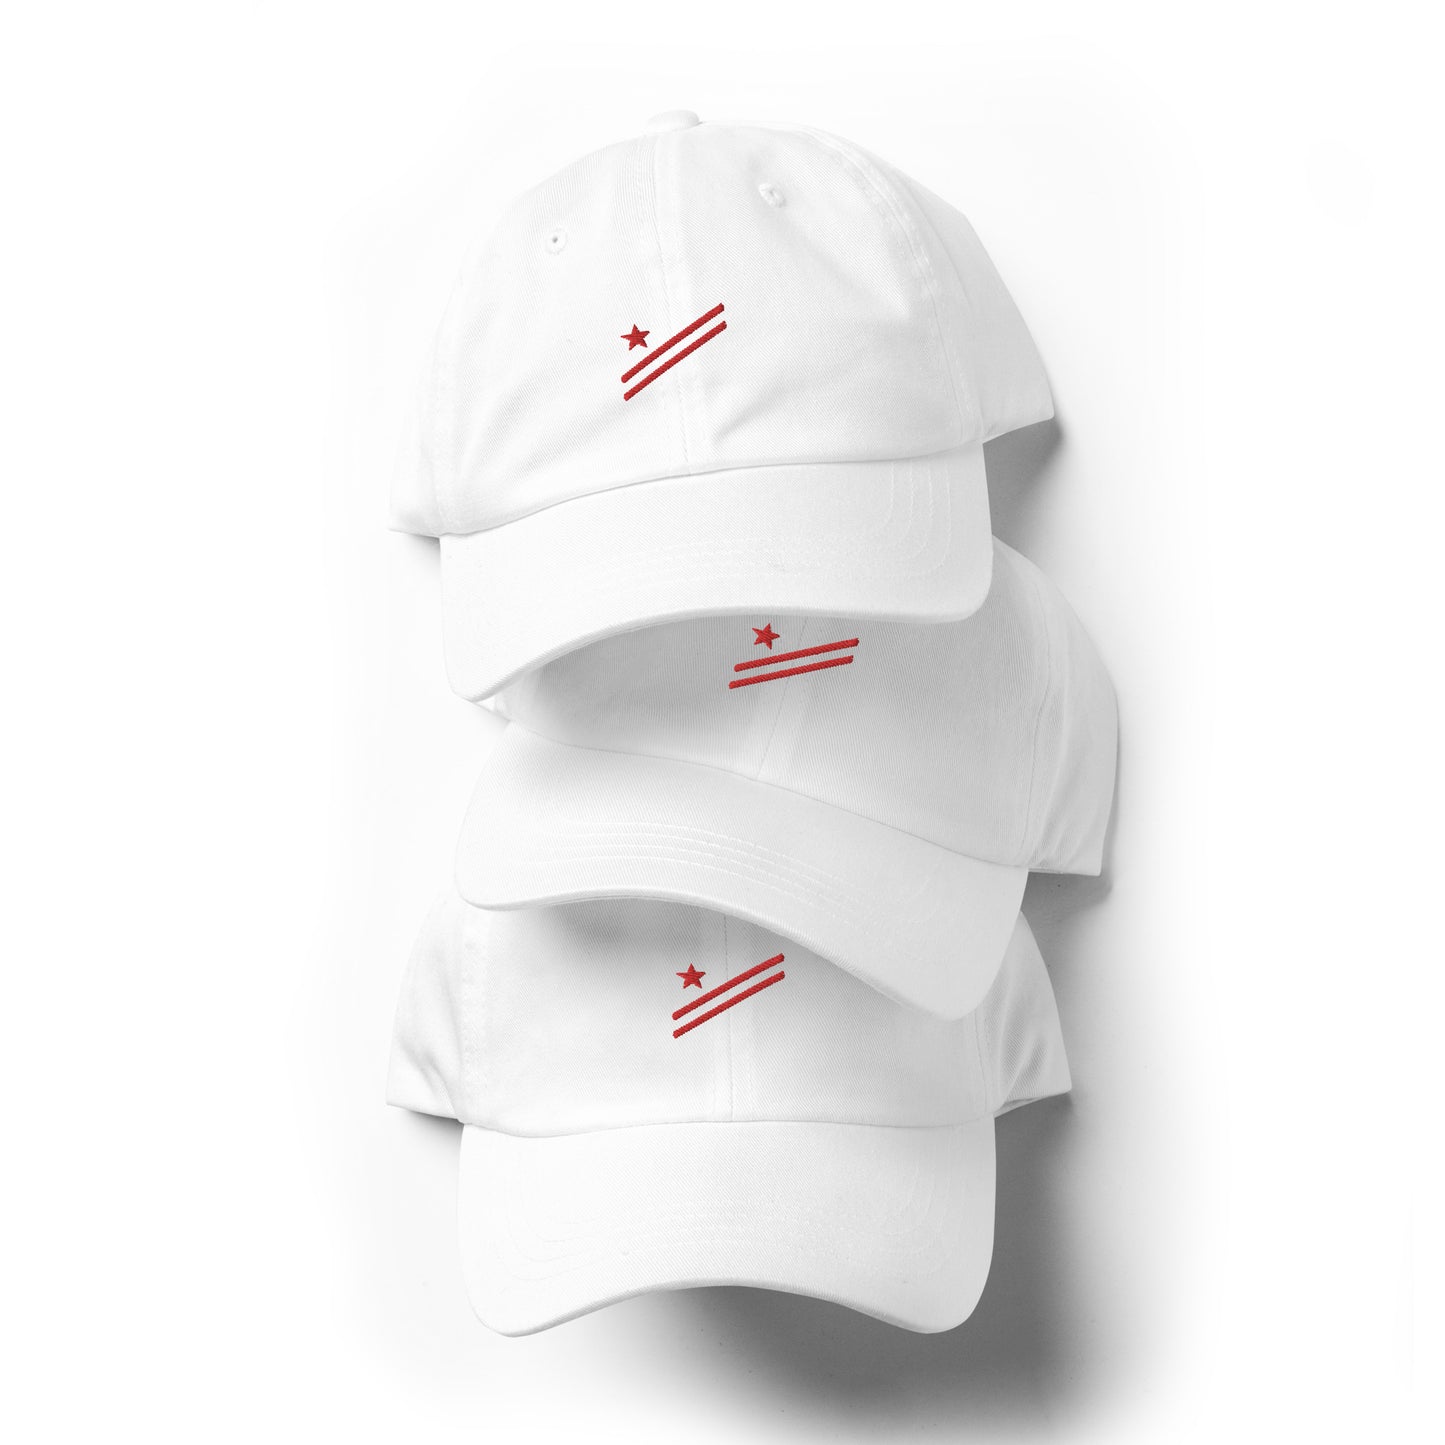 Martyrs - Classic Dad hat - RED FLAG broderie